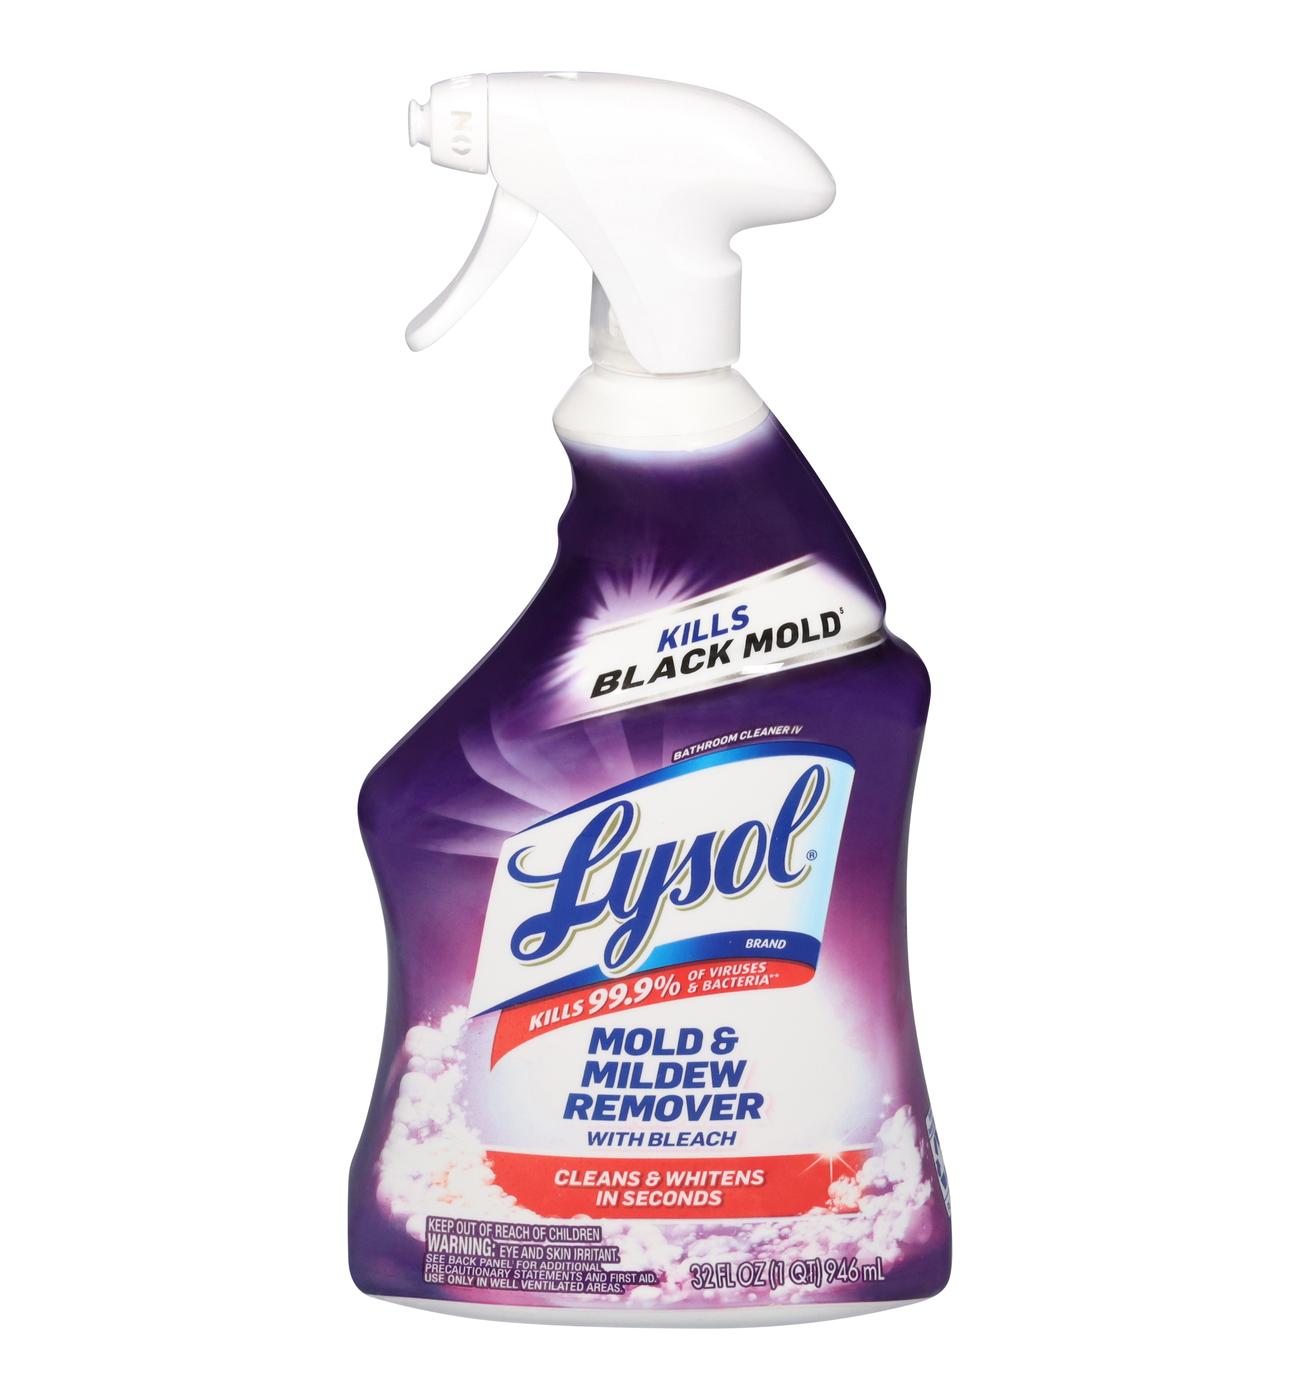 Lysol Mold & Mildew Remover with Bleach Cleaner Spray; image 1 of 3